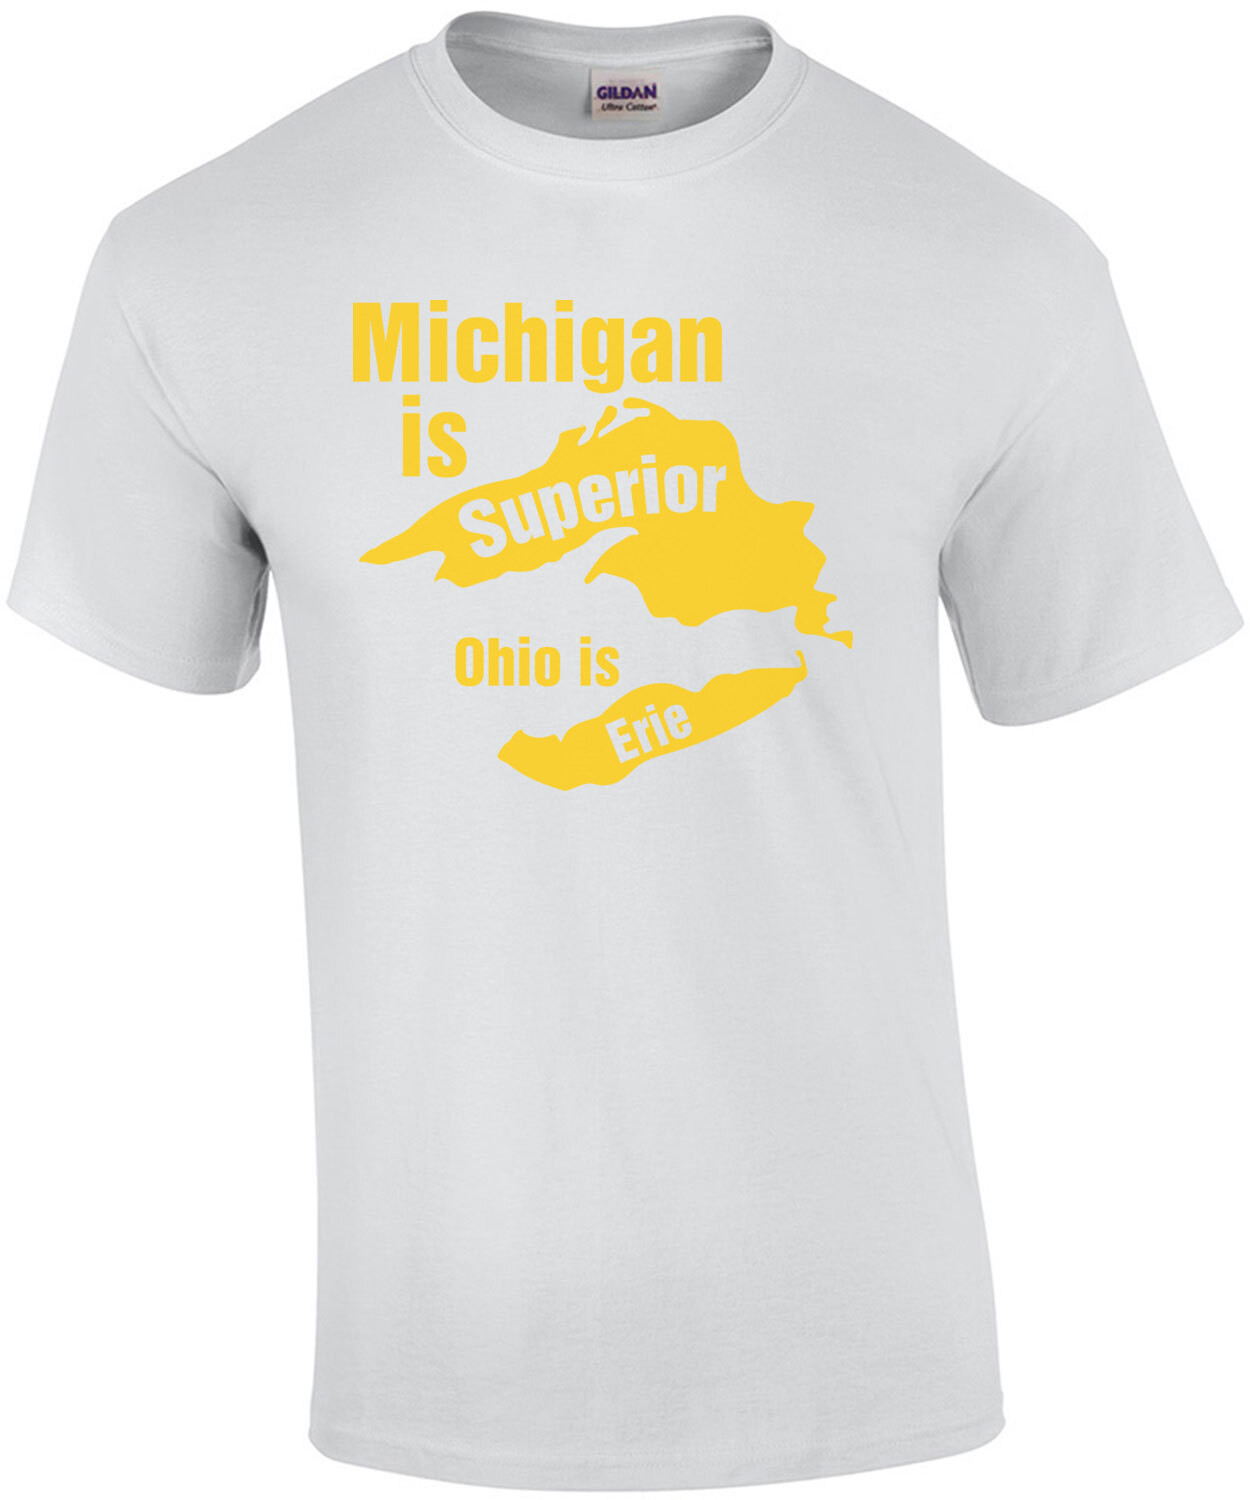 Michigan Is Superior To Erie T-Shirt